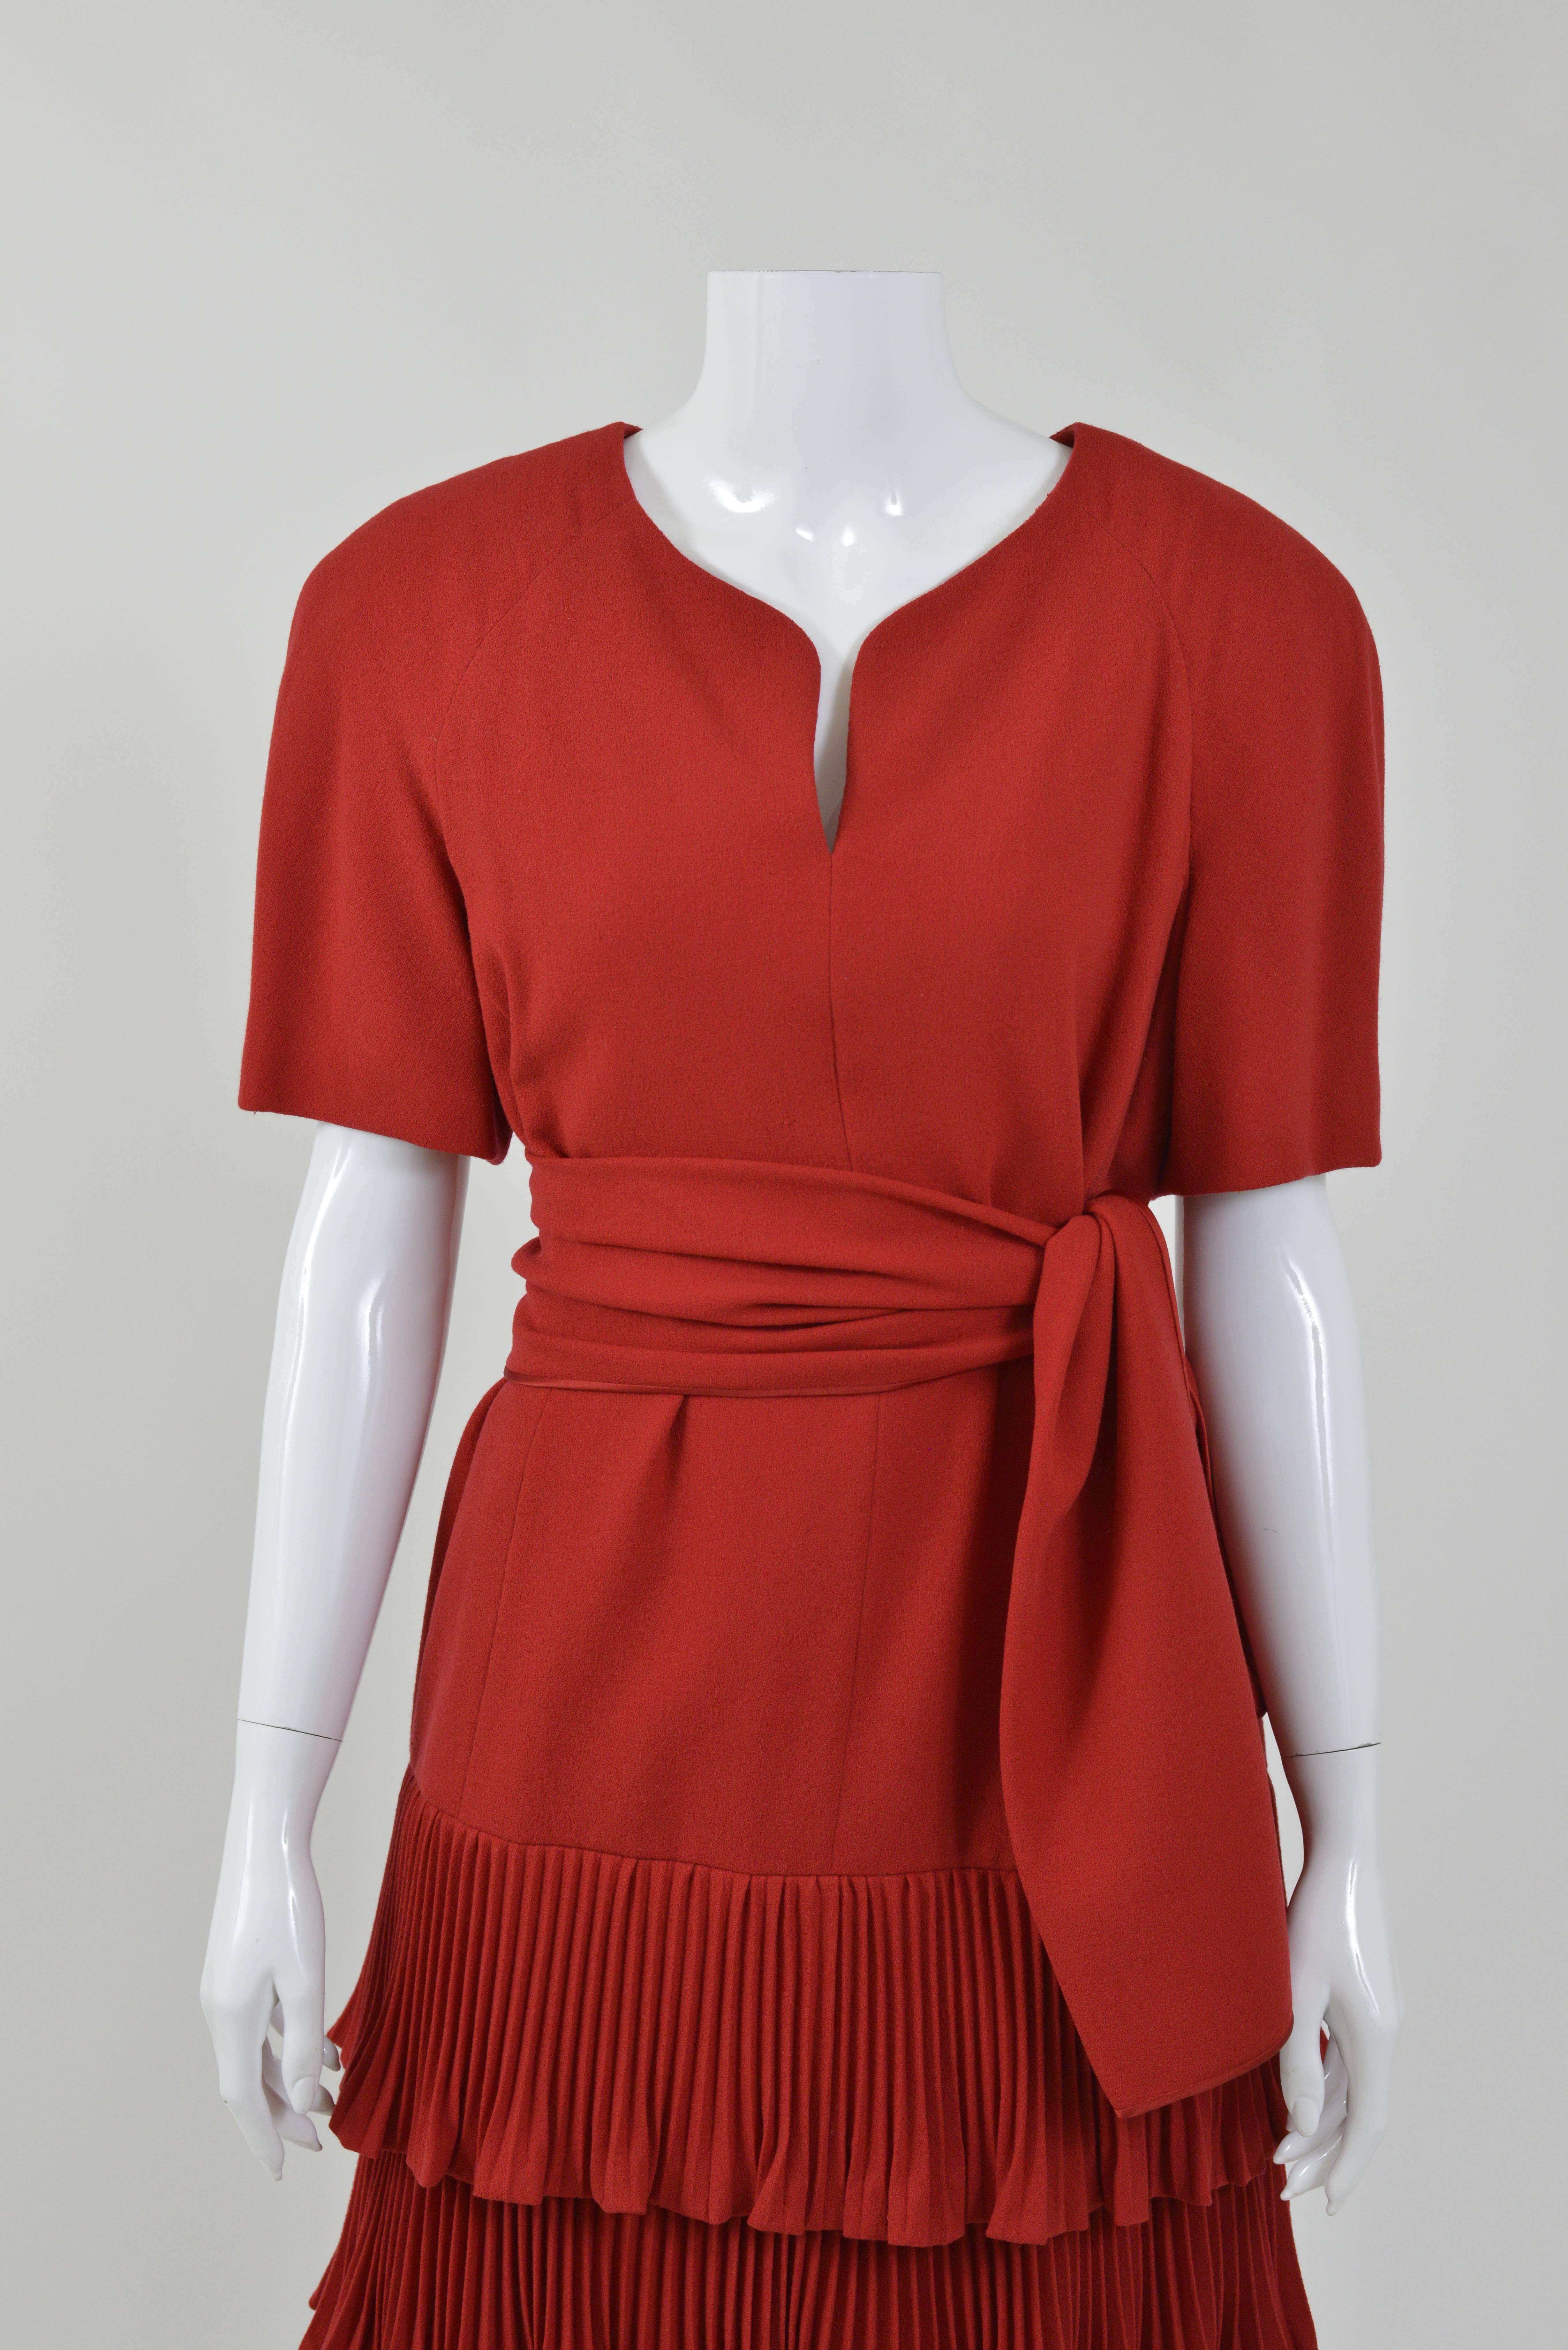 Women's 1990s VALENTINO COUTURE Red Pleateds Cocktail Dress For Sale